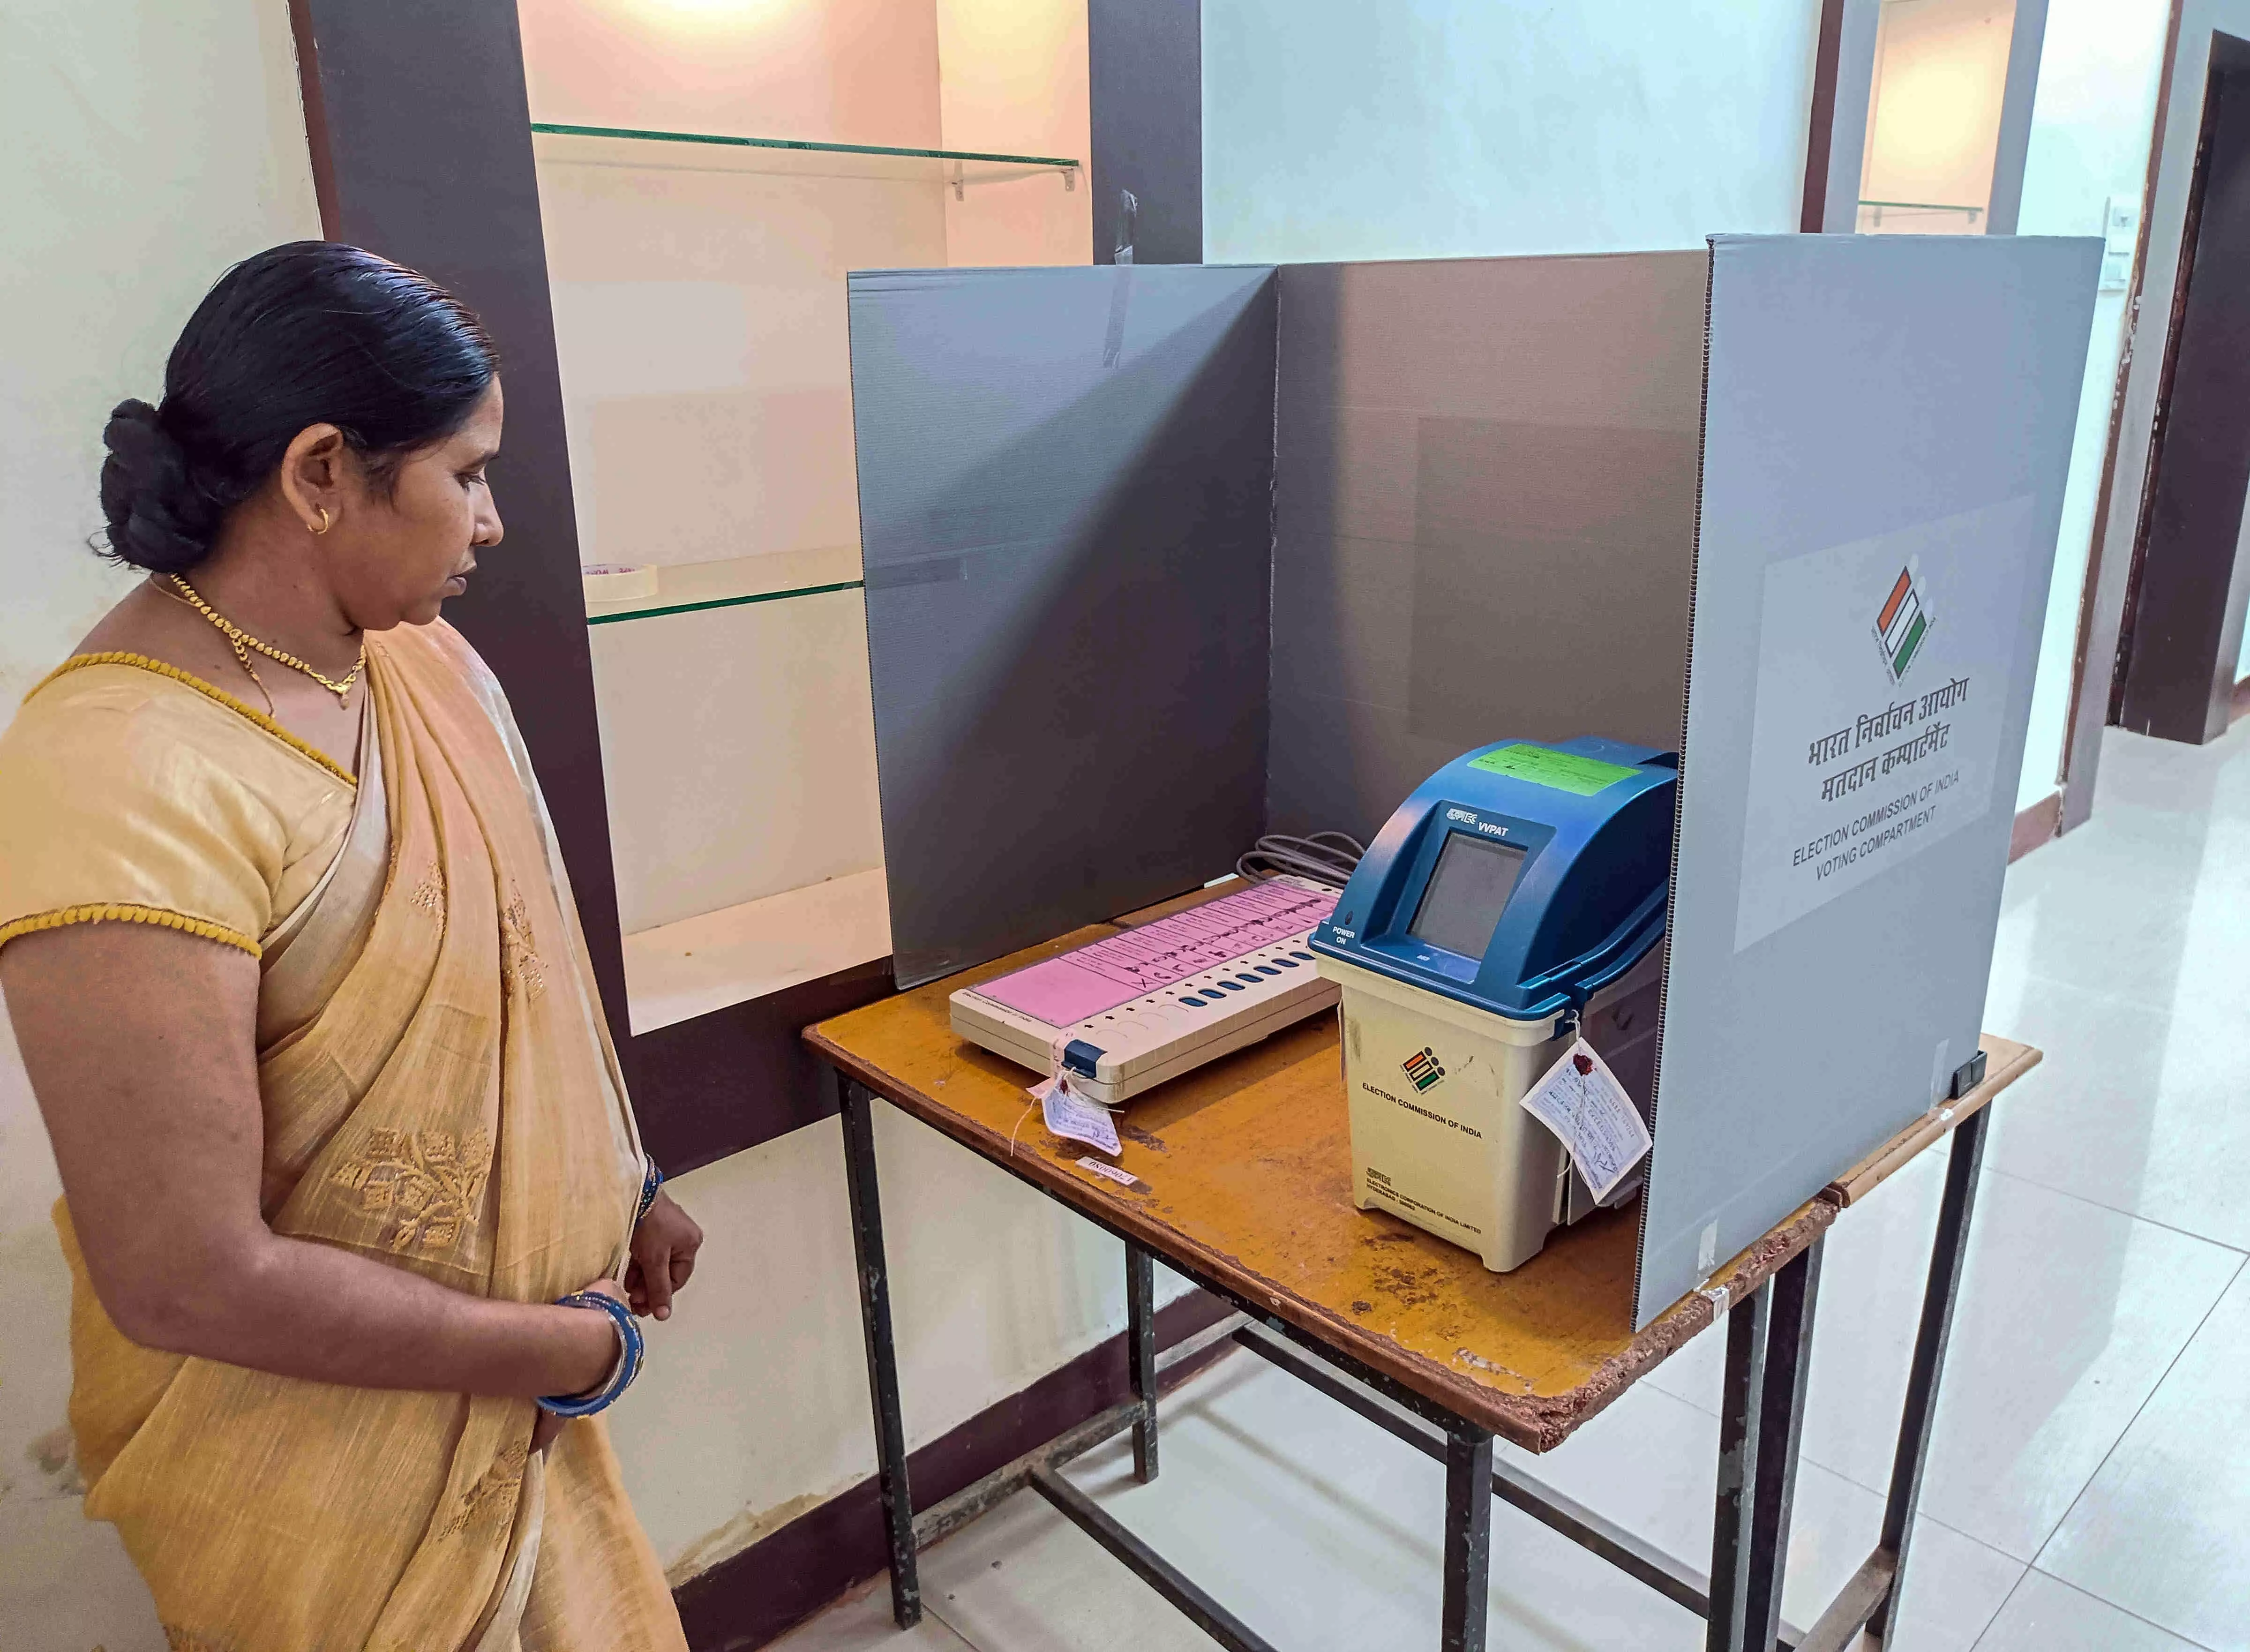 Poll officers cant force electors who refuse to vote at poll booths, says Election Commissions rule